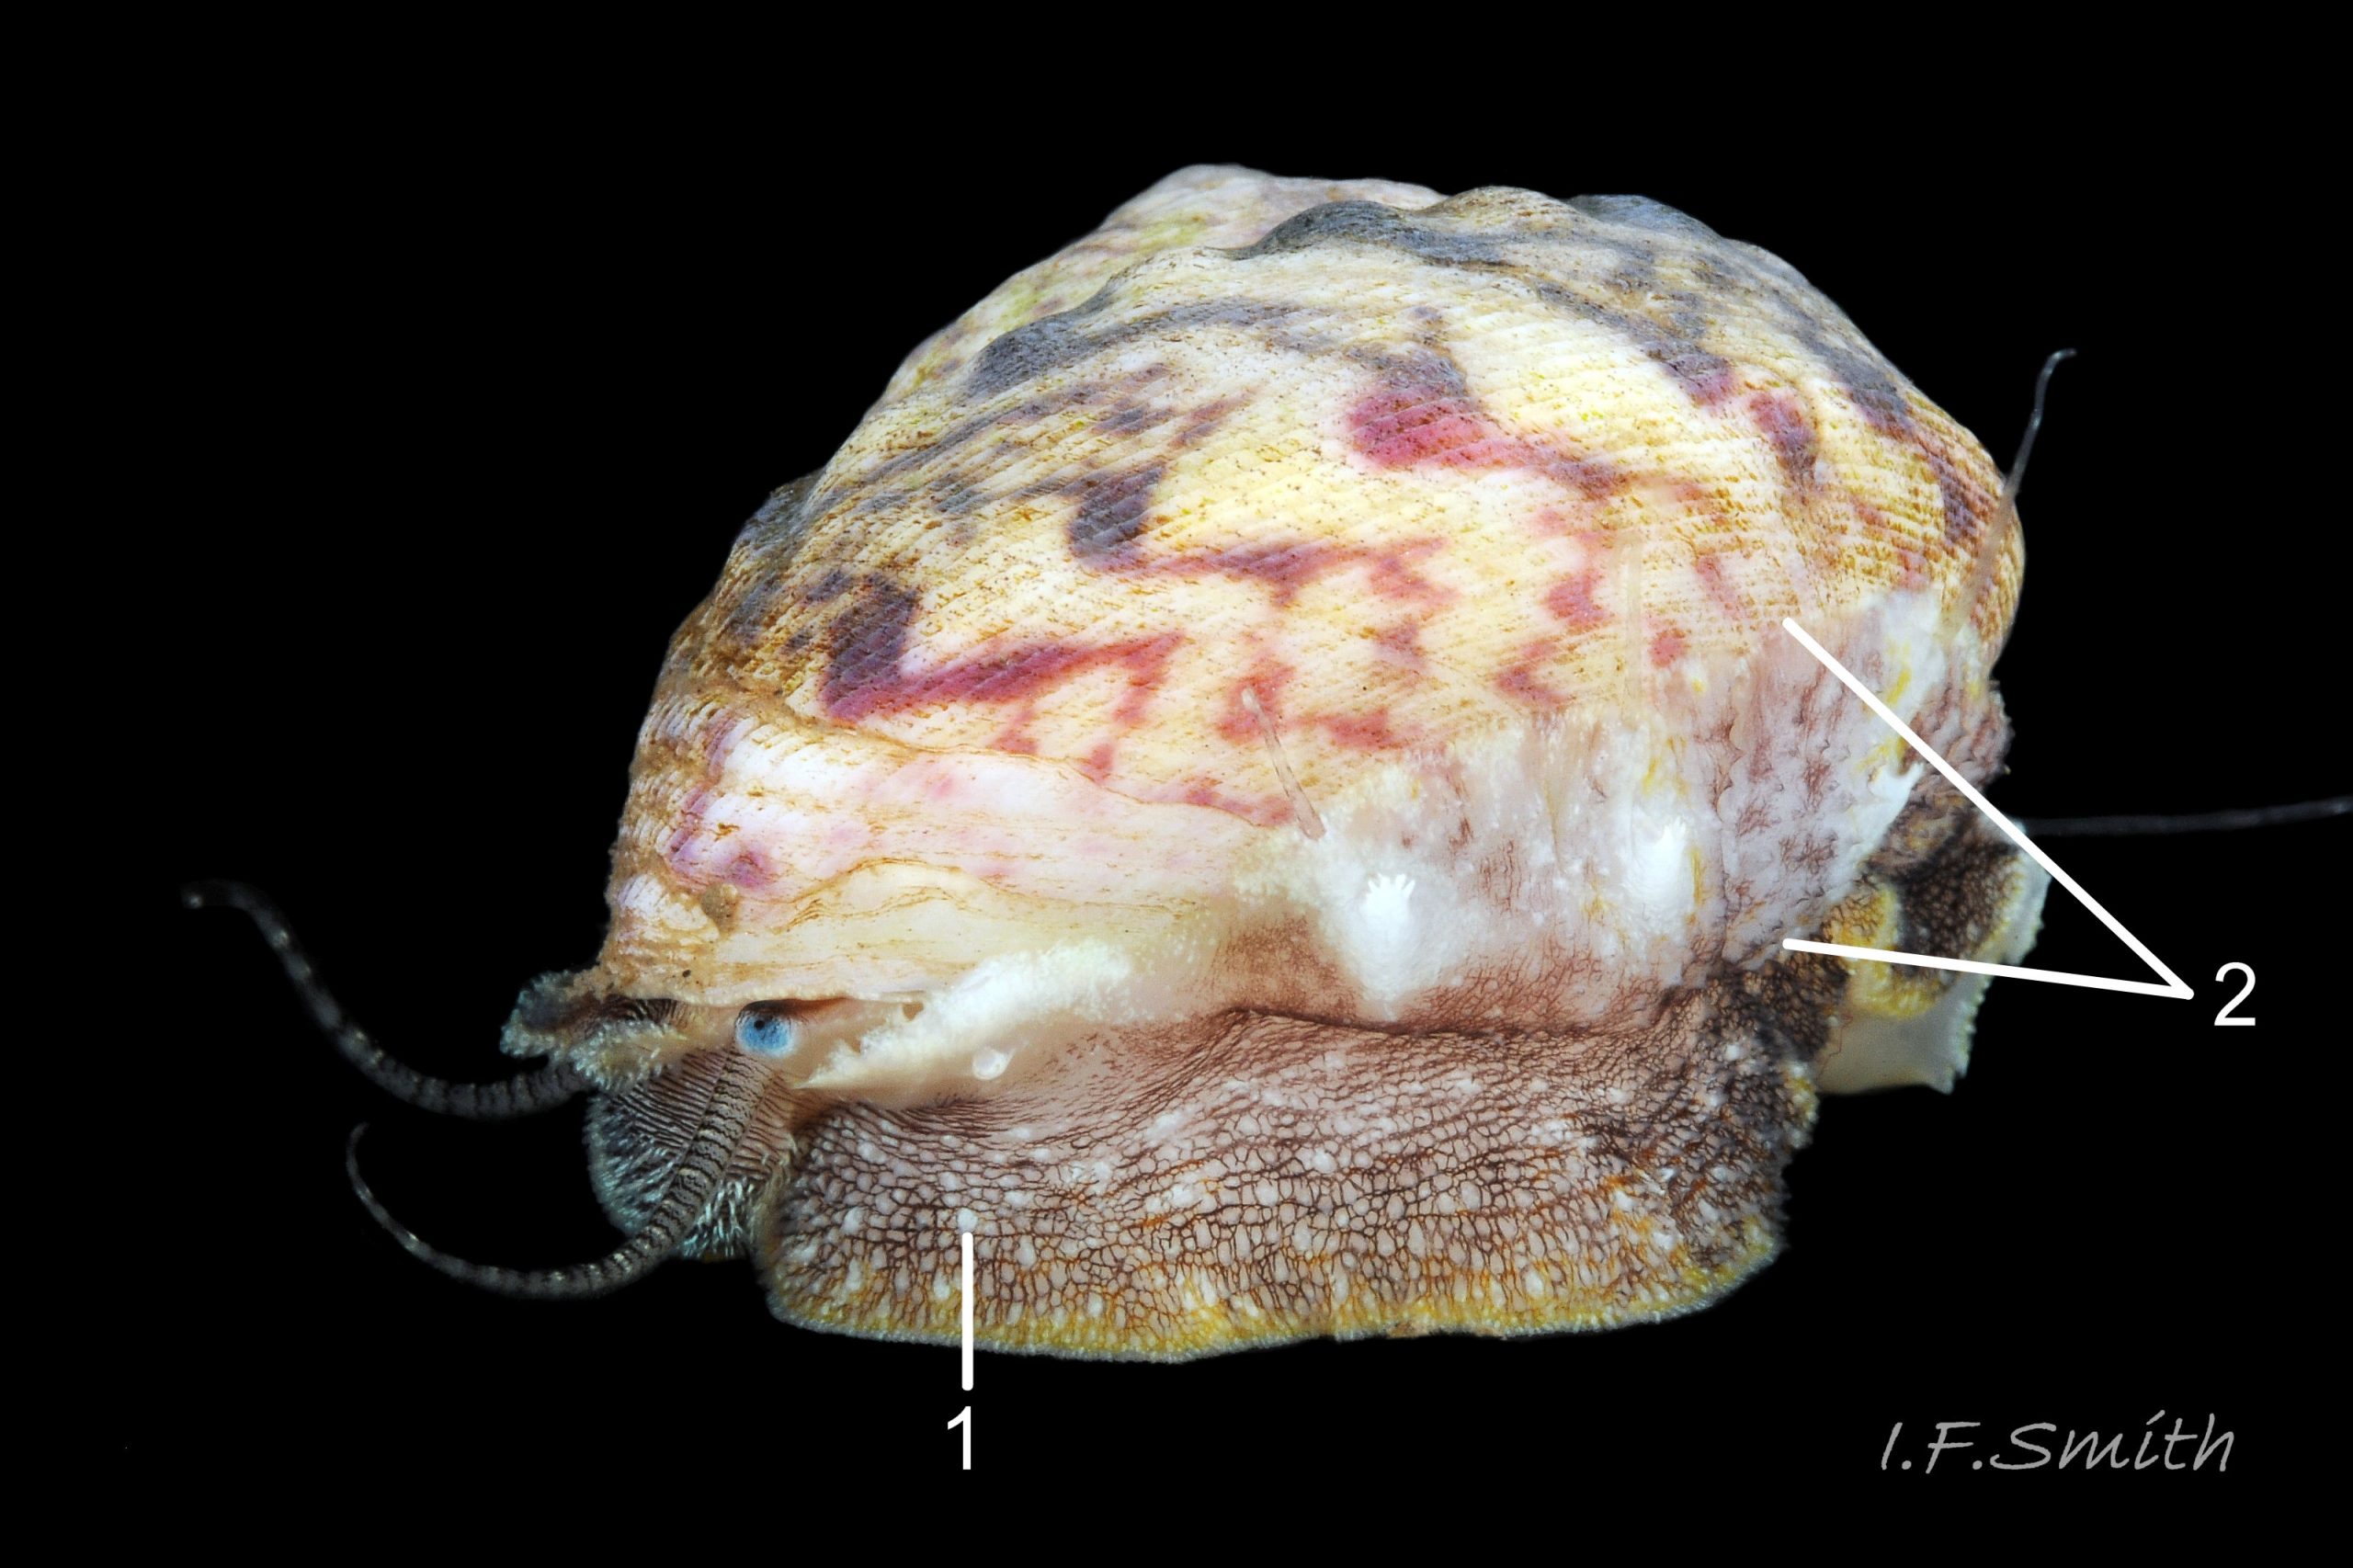 10 Gibbula magus. Height 19mm, breadth 25mm. Cardigan Bay, Wales. 2015.